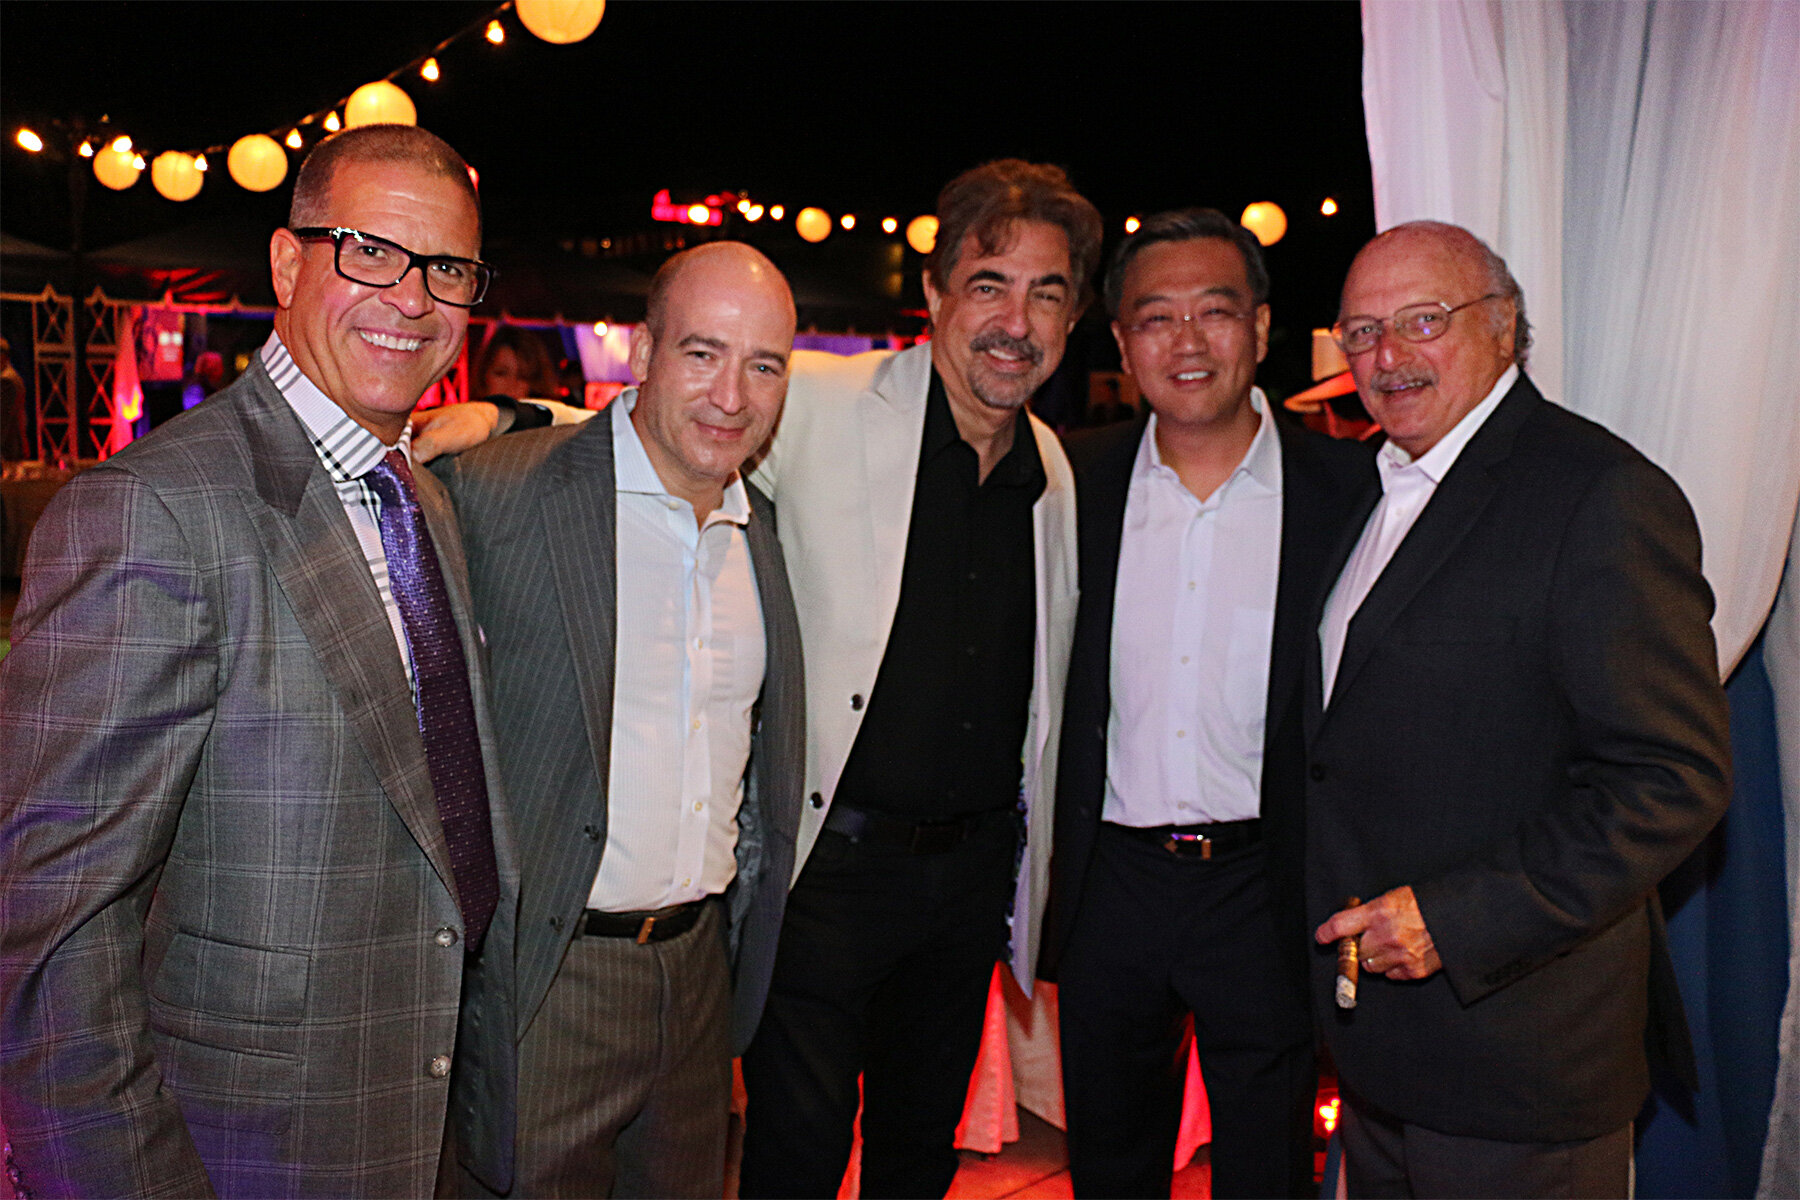 Johnny Lopez (left, executive producer of the Lost City and partner of Platinum Equity), Craig Weiss, Joe Mantegna, Keith K. Park and Dennis Franz